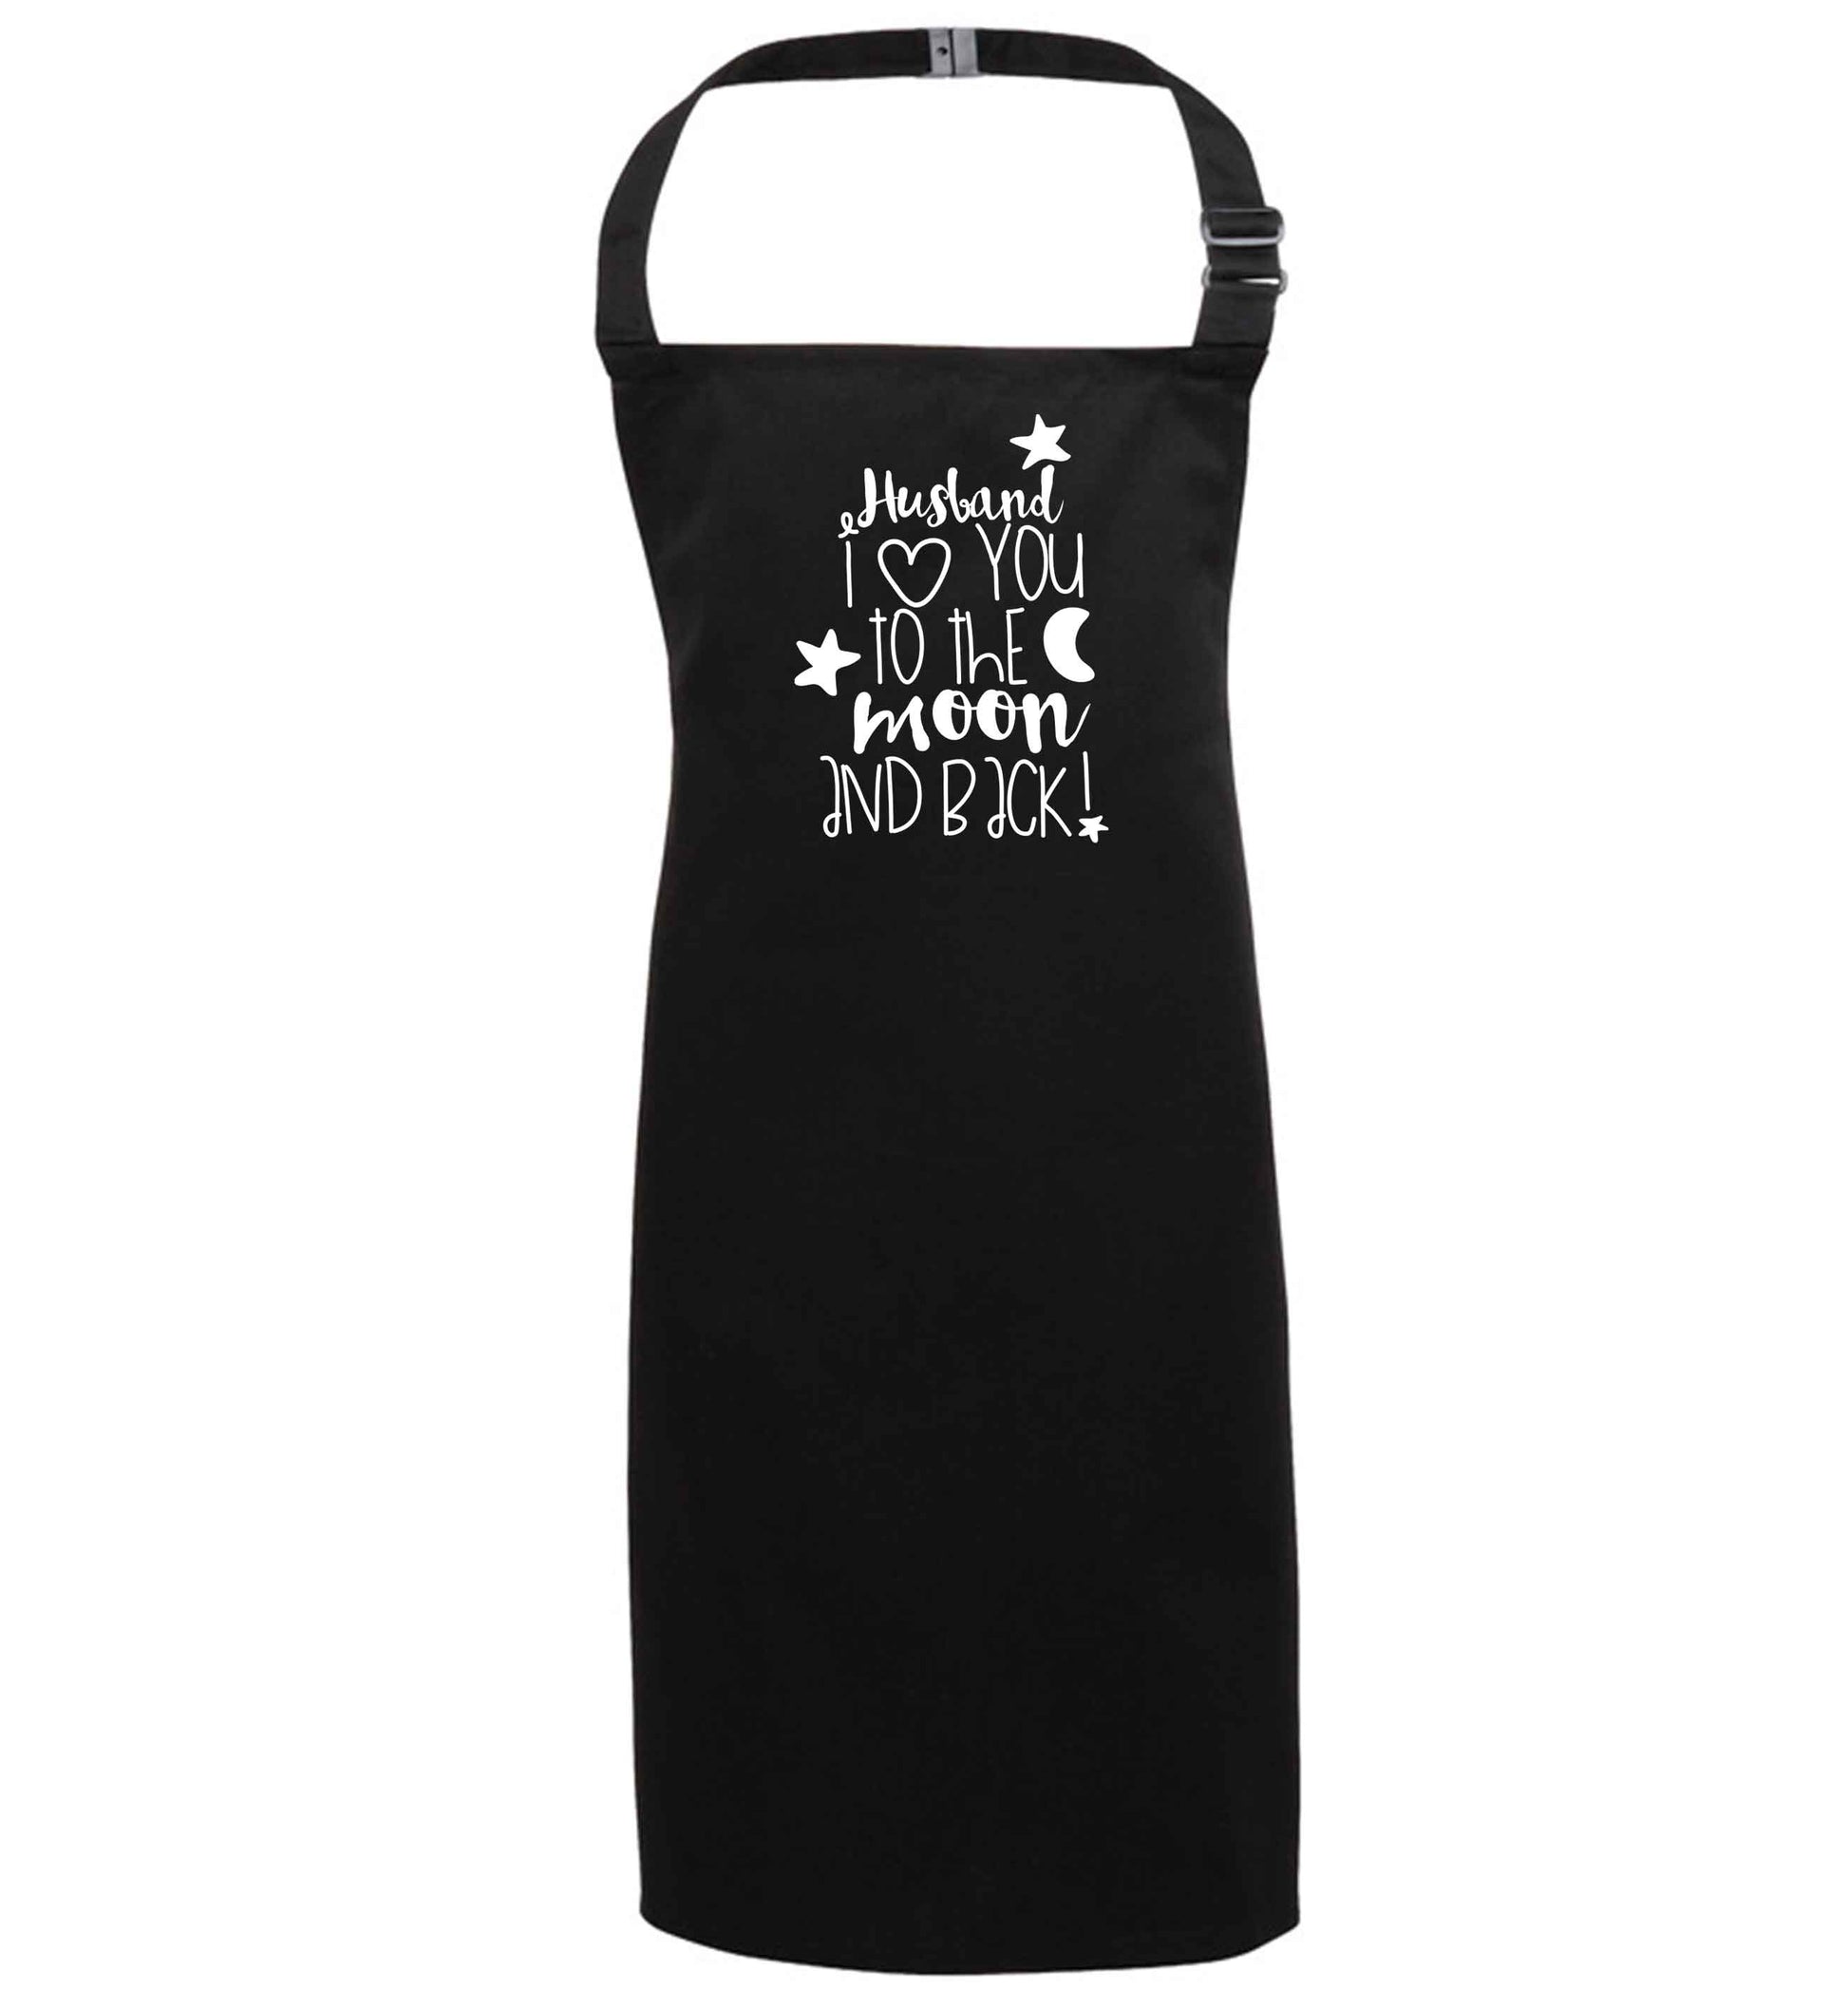 Husband I love you to the moon and back black apron 7-10 years